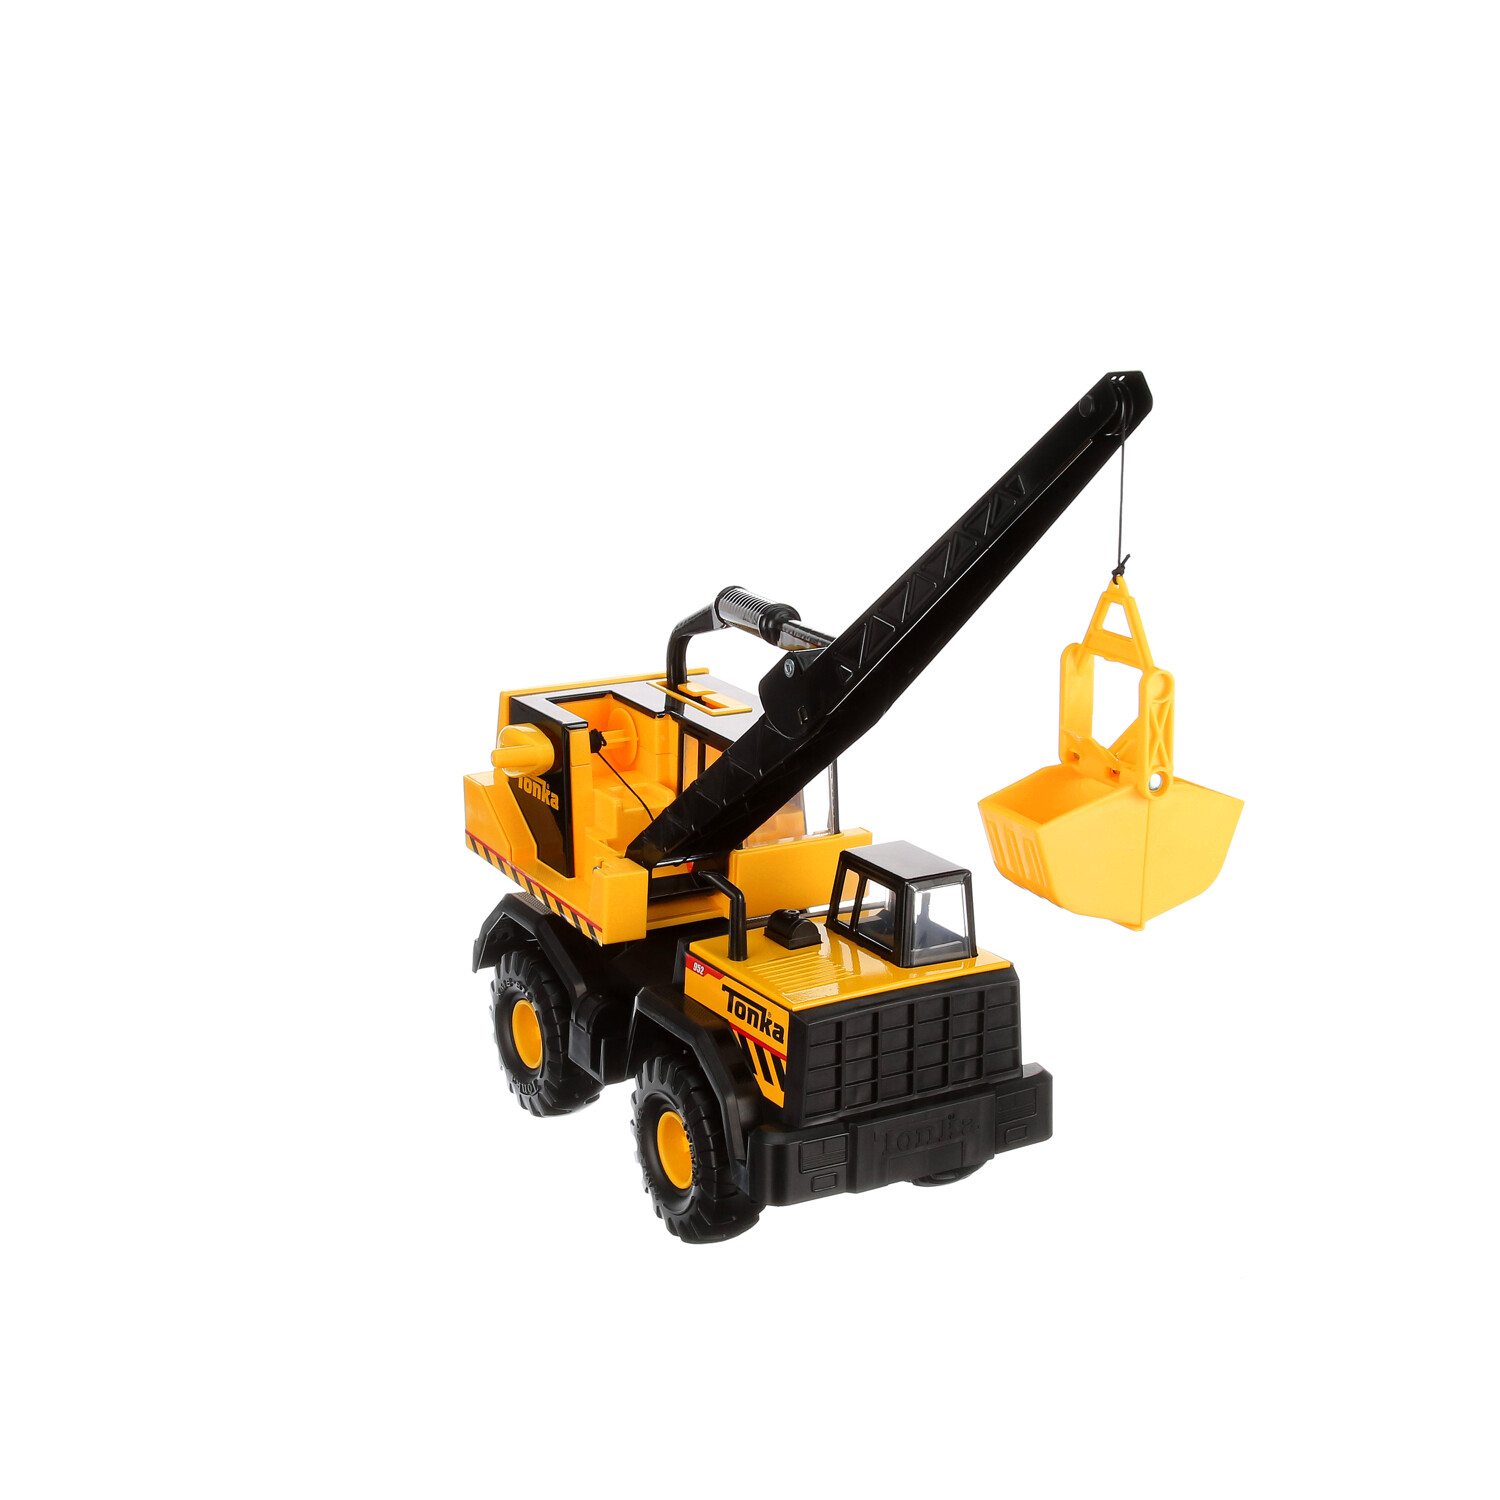 Tonka Steel Classics Mighty Crane, 23 High, Kids Construction Toy for Boys  and Girls, Interactive Toy Vehicle for Creative & Realistic Play, Great